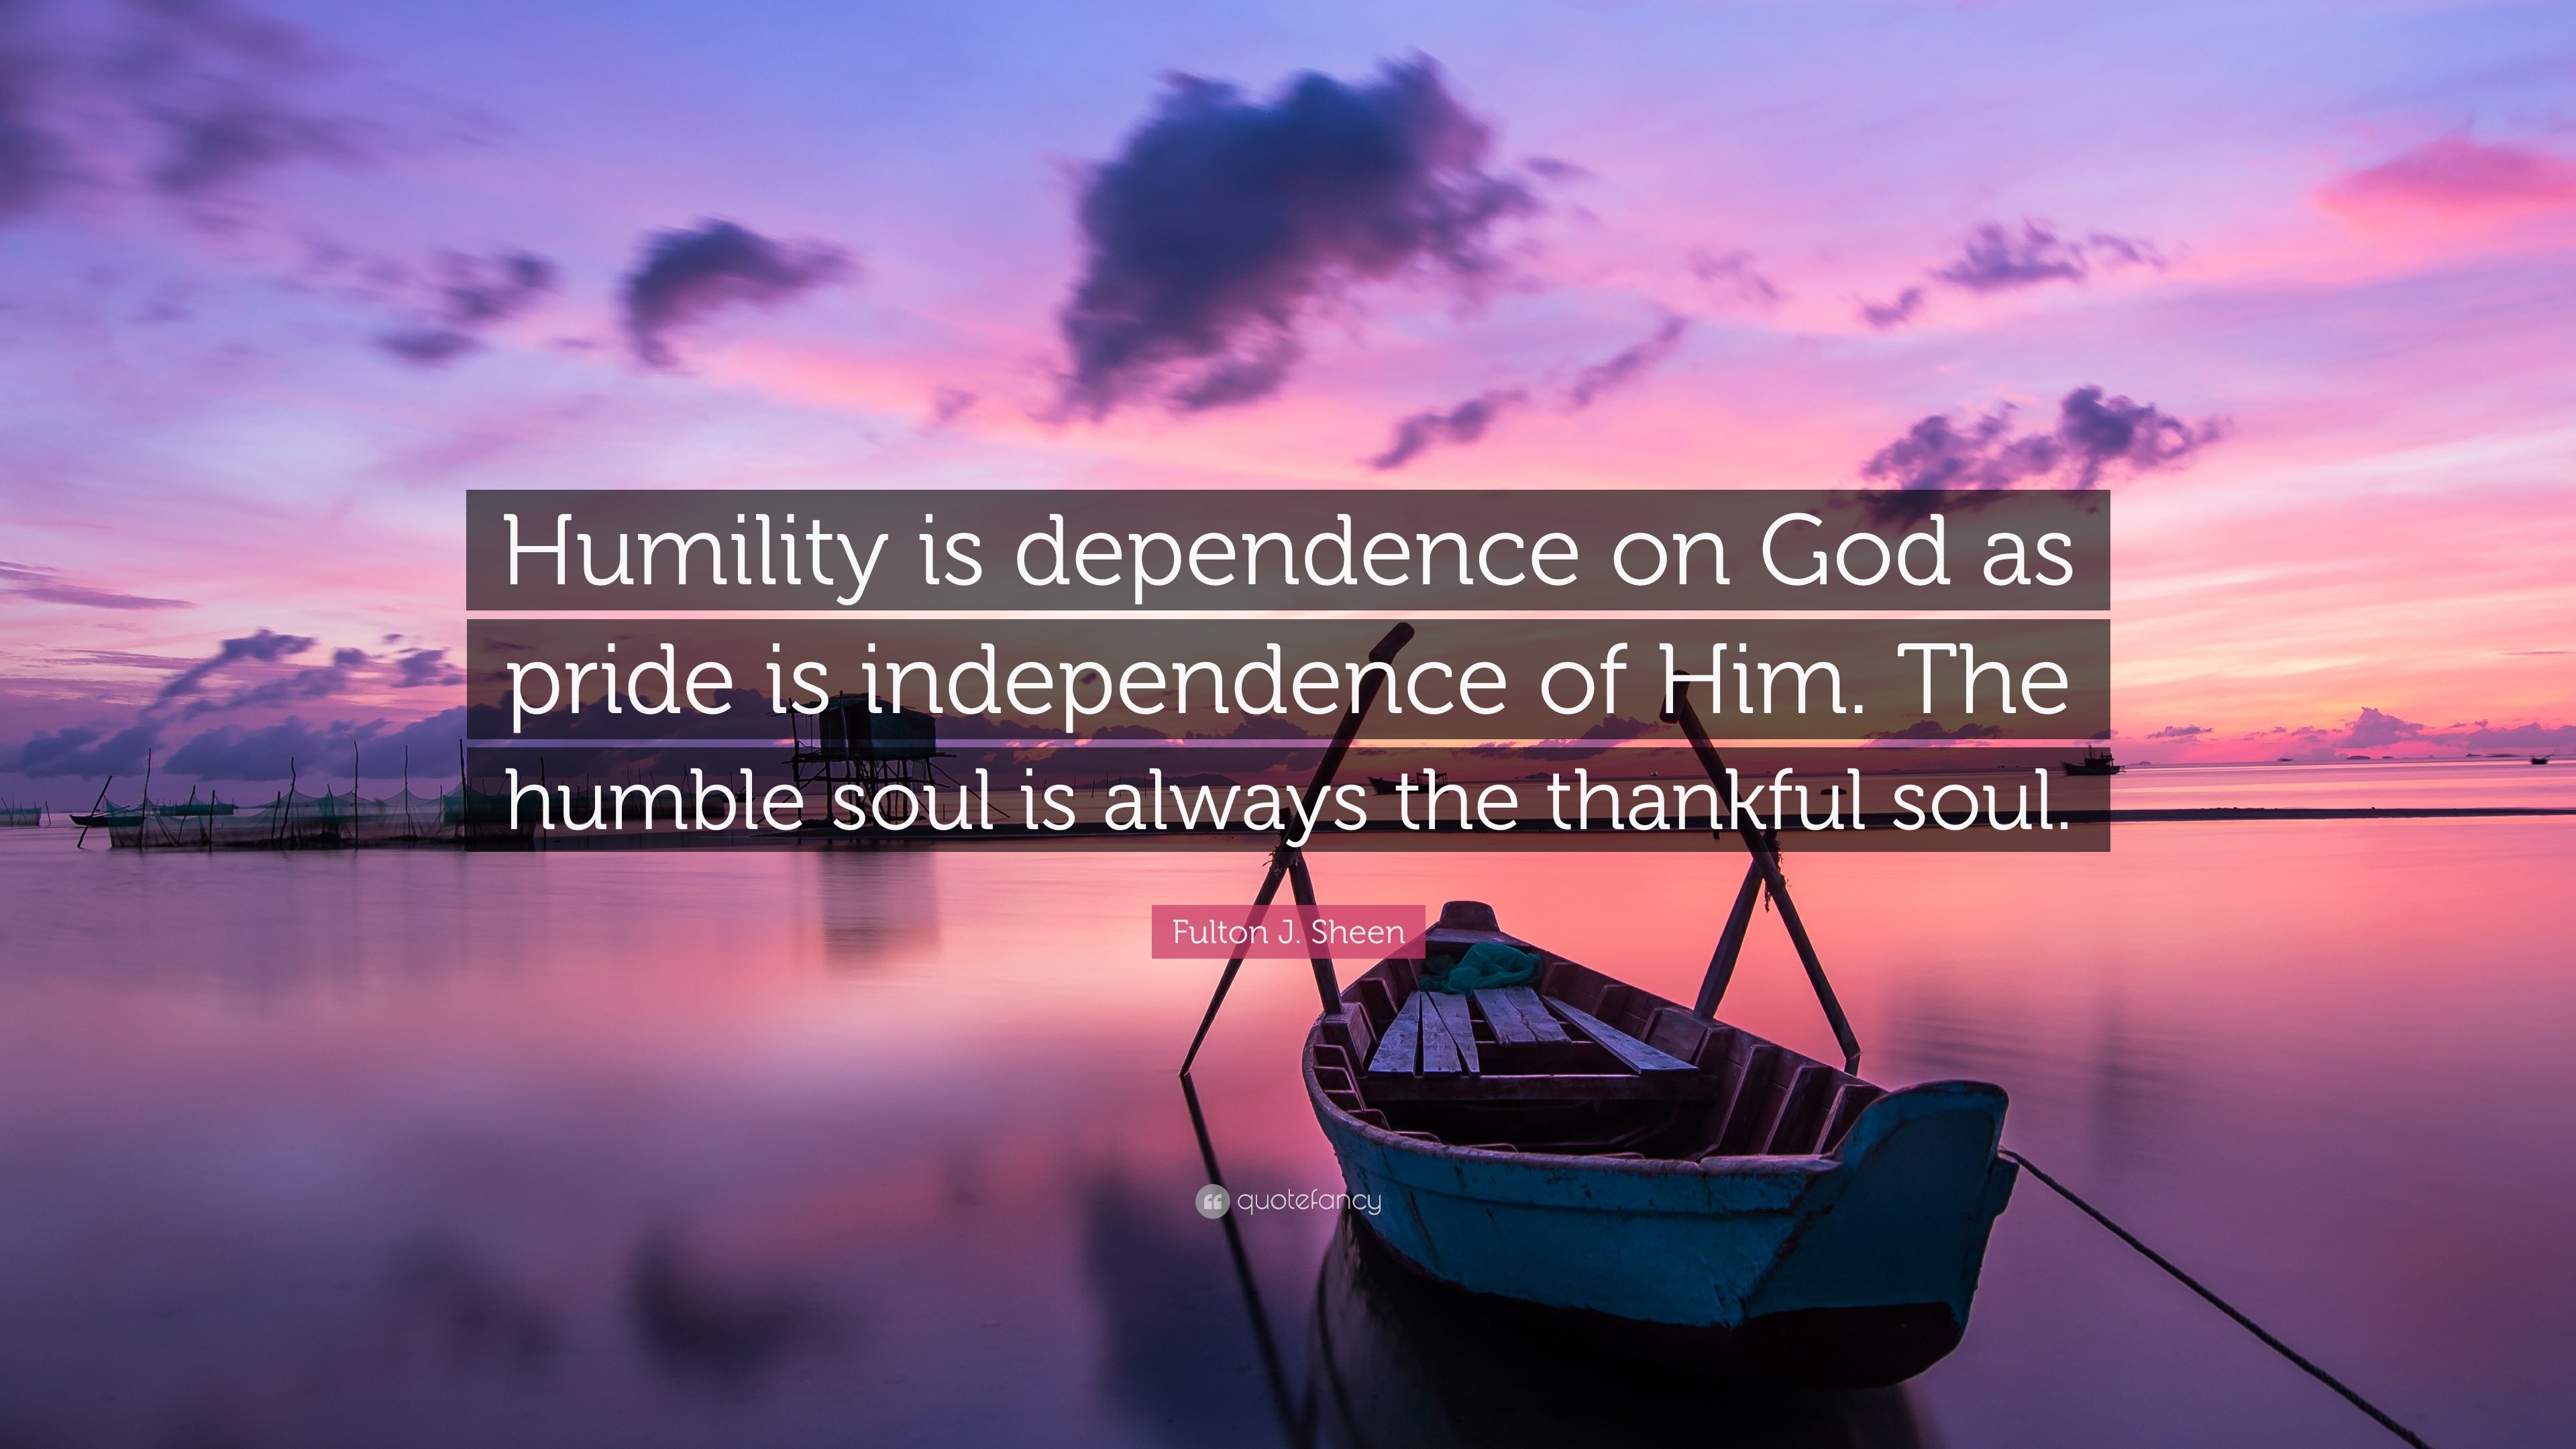 Fulton J. Sheen Quote: “Humility is dependence on God as pride is